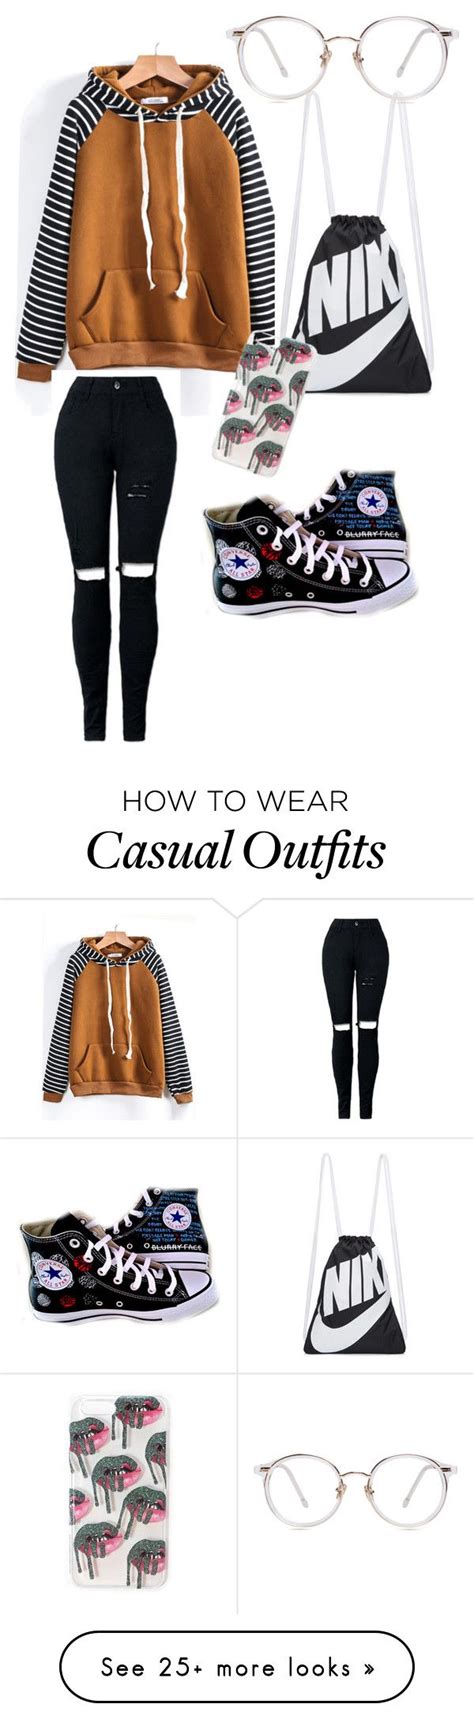 Black tomboy tumblr posts tumbral com : "Casual" by emutrash4 on Polyvore featuring NIKE and Converse | Tomboy outfits, Dance outfits ...